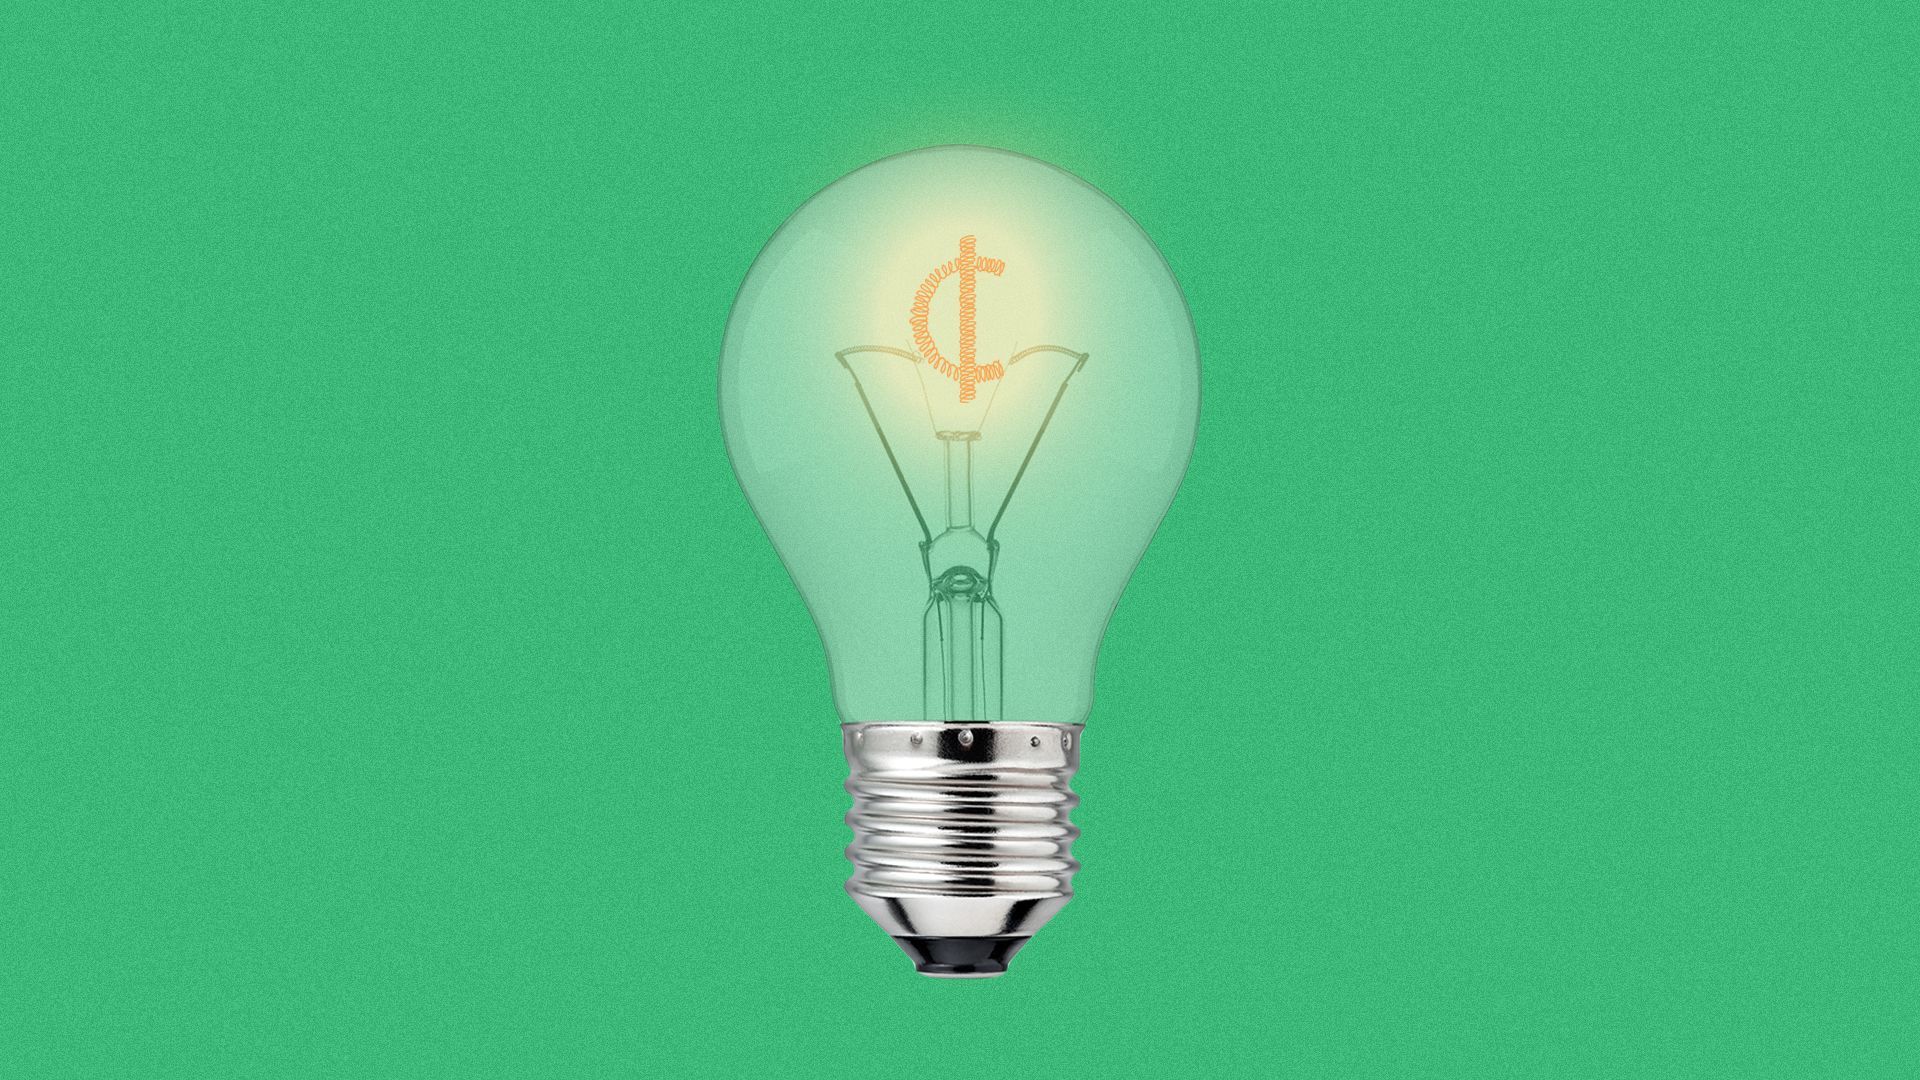 Illustration of a light bulb with the filament in the shape of a cent symbol.